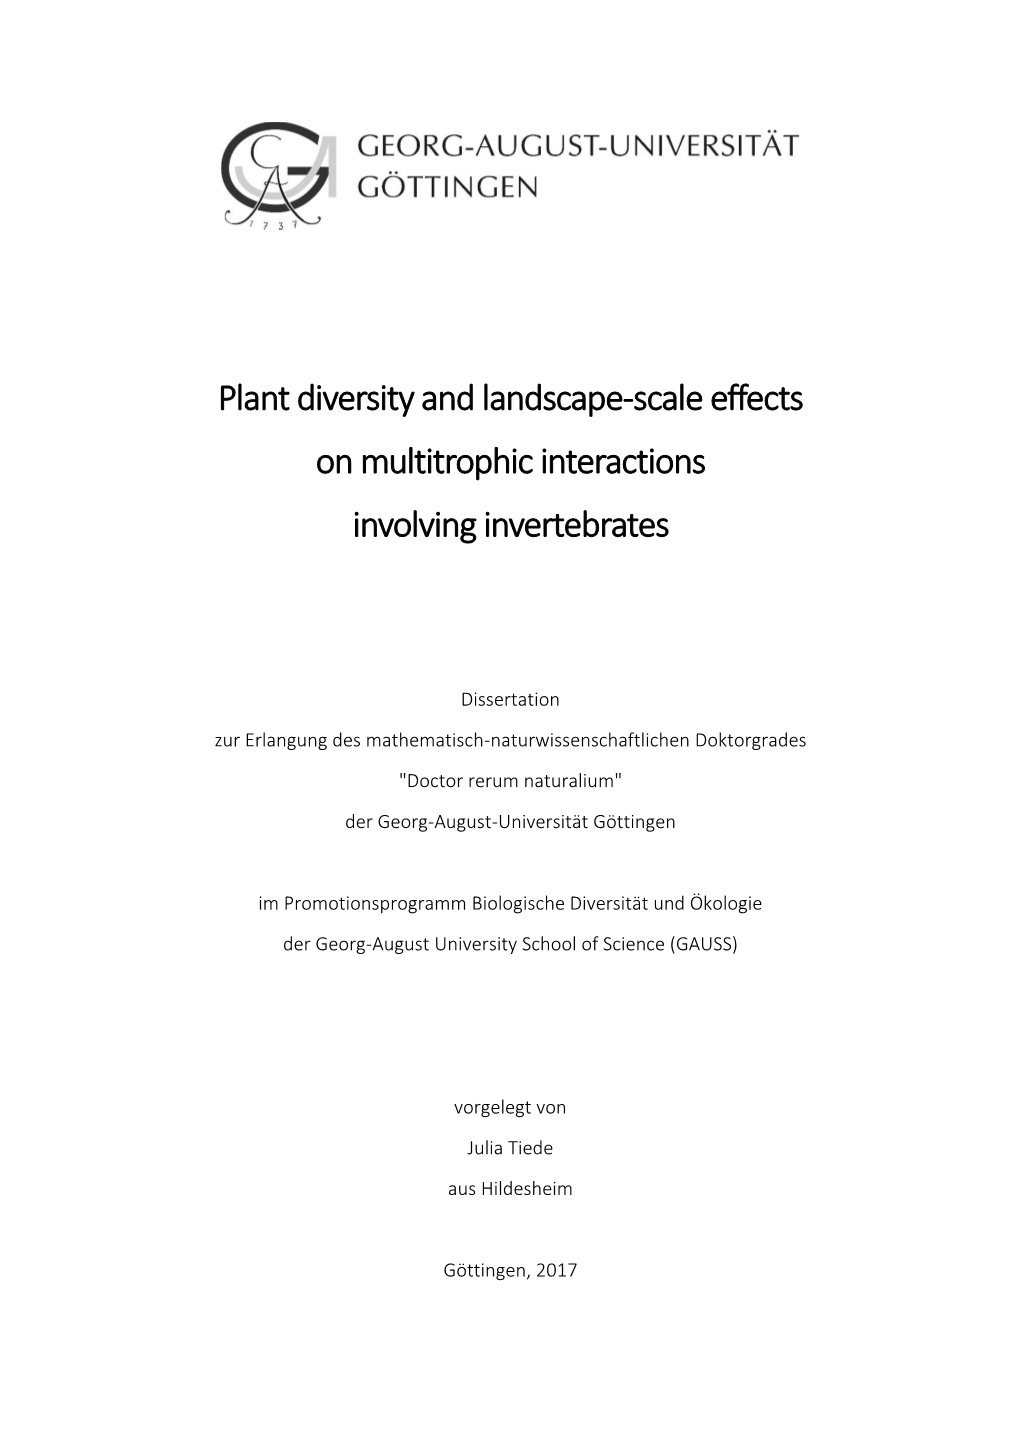 Plant Diversity and Landscape-Scale Effects on Multitrophic Interactions